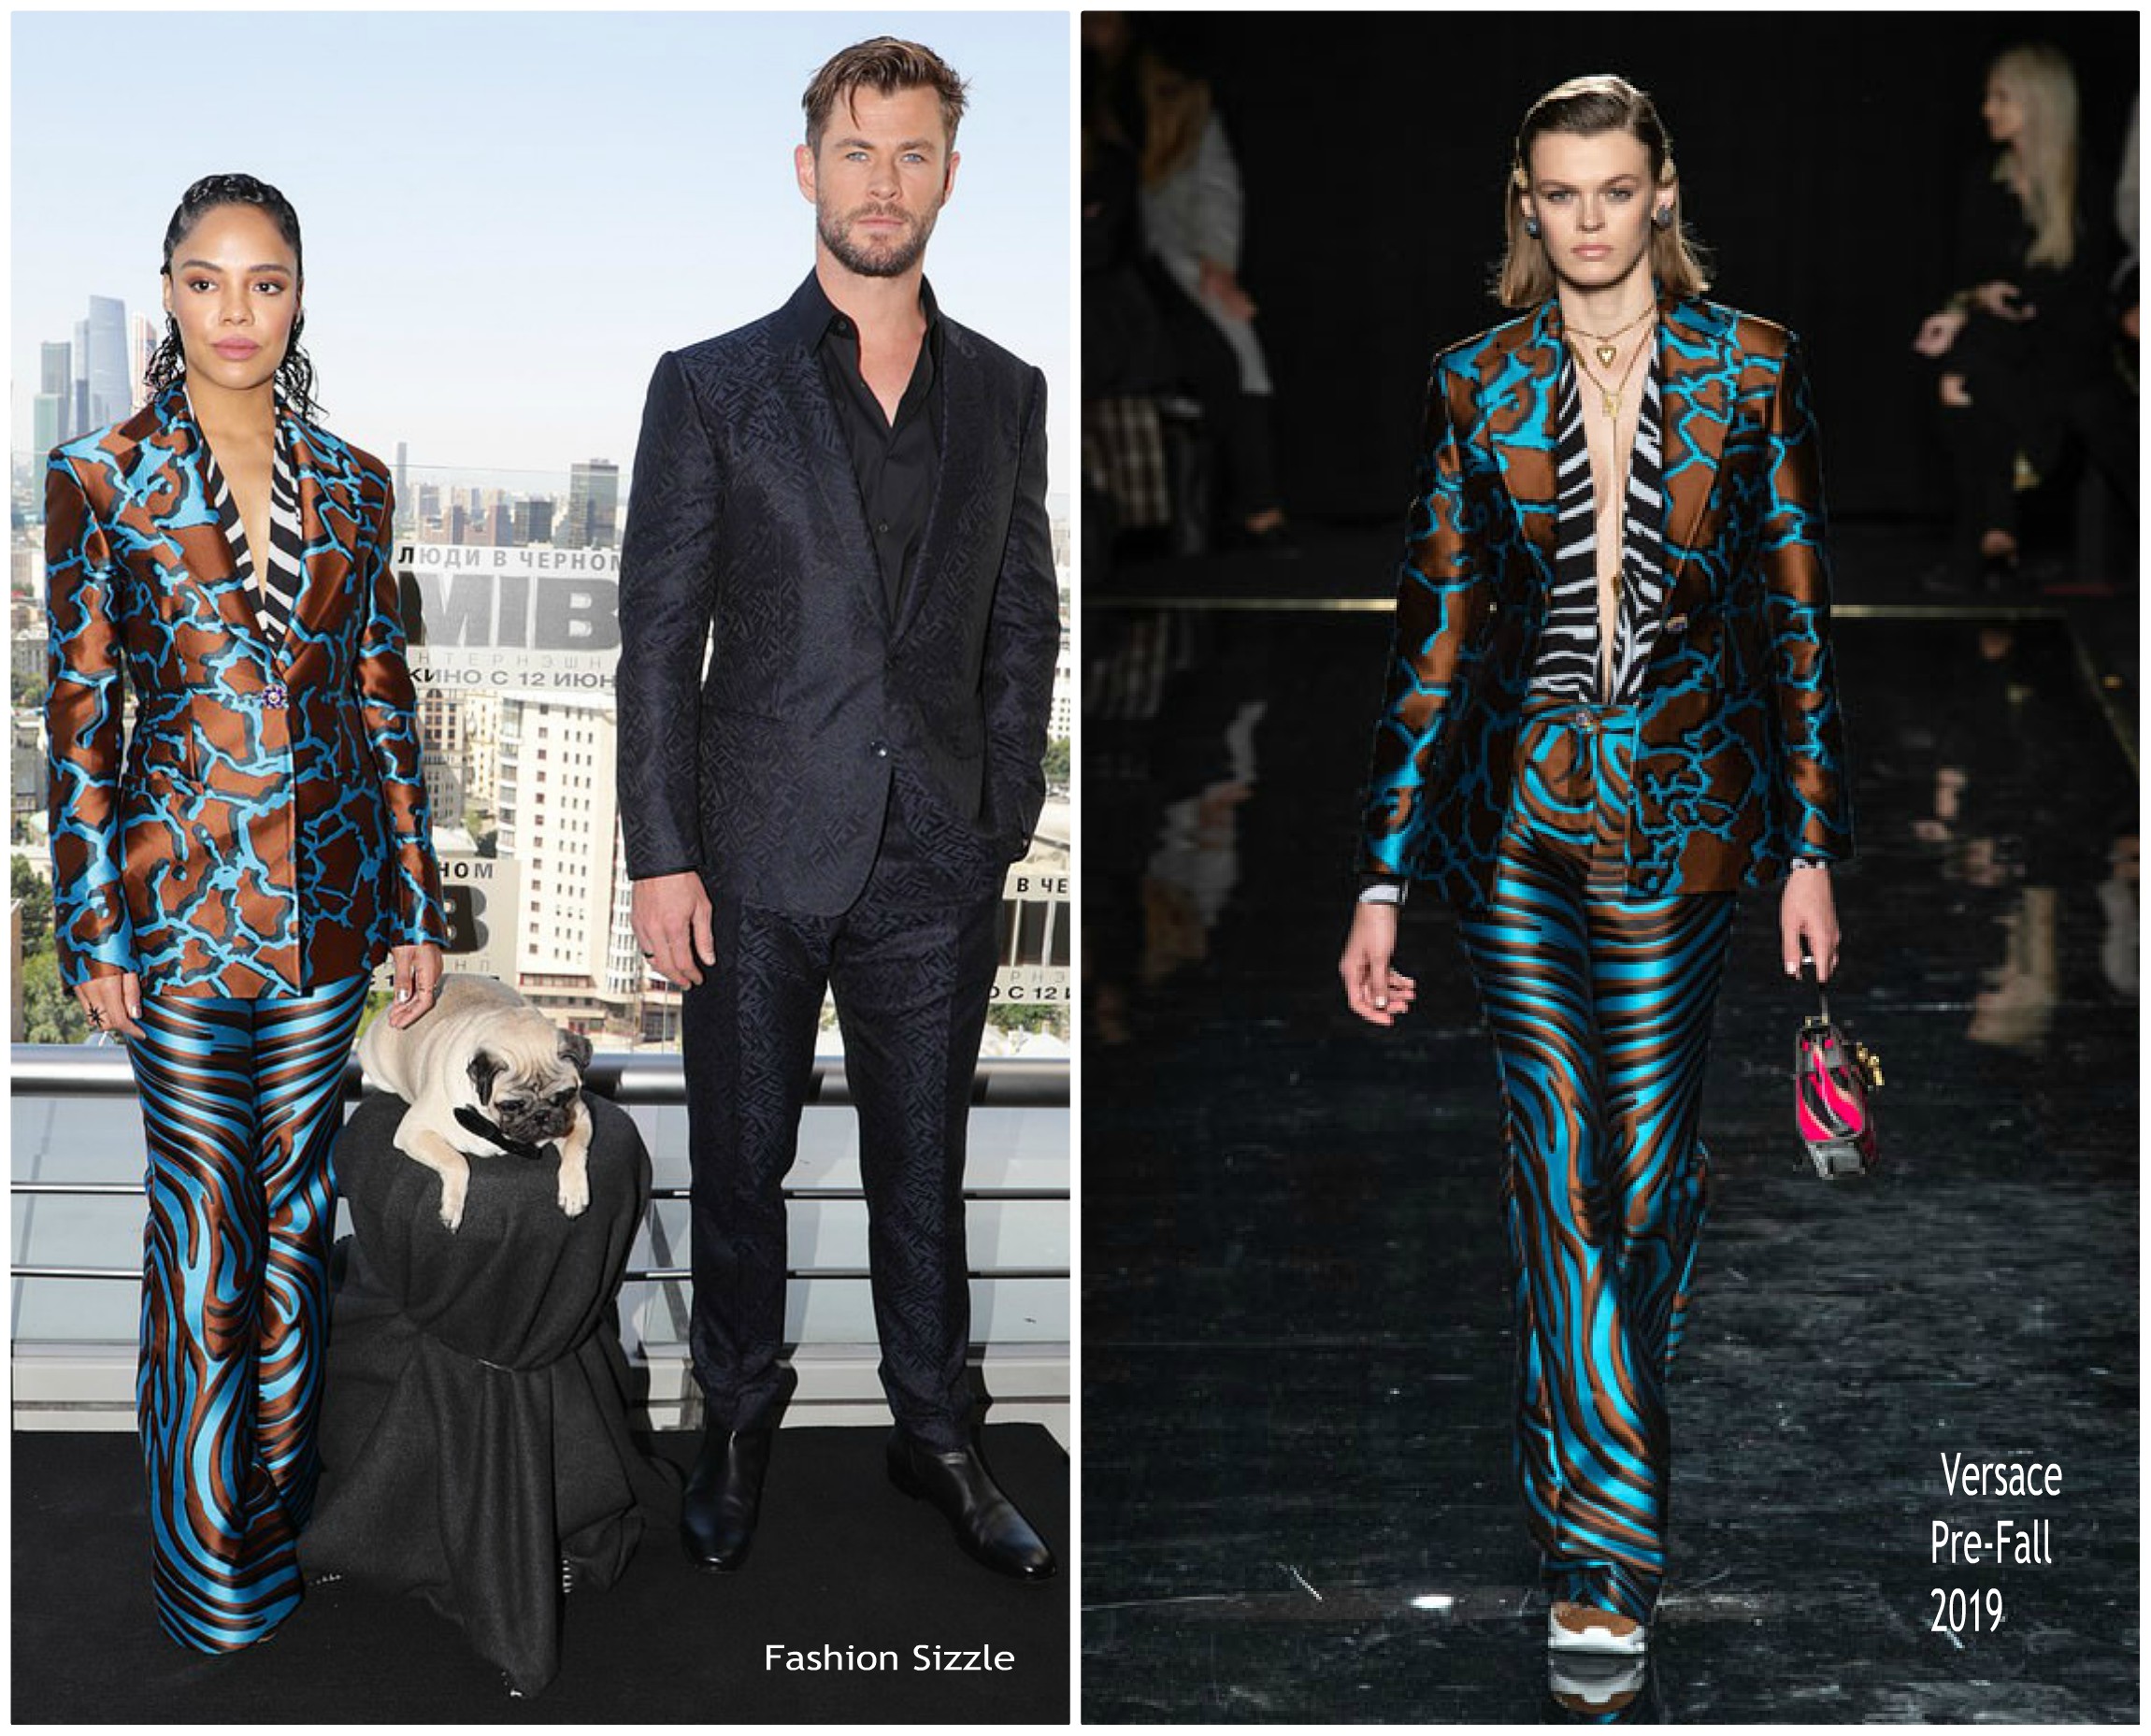 Tessa Thompson in Versace @ ‘Men in Black: International’ Moscow Photocall